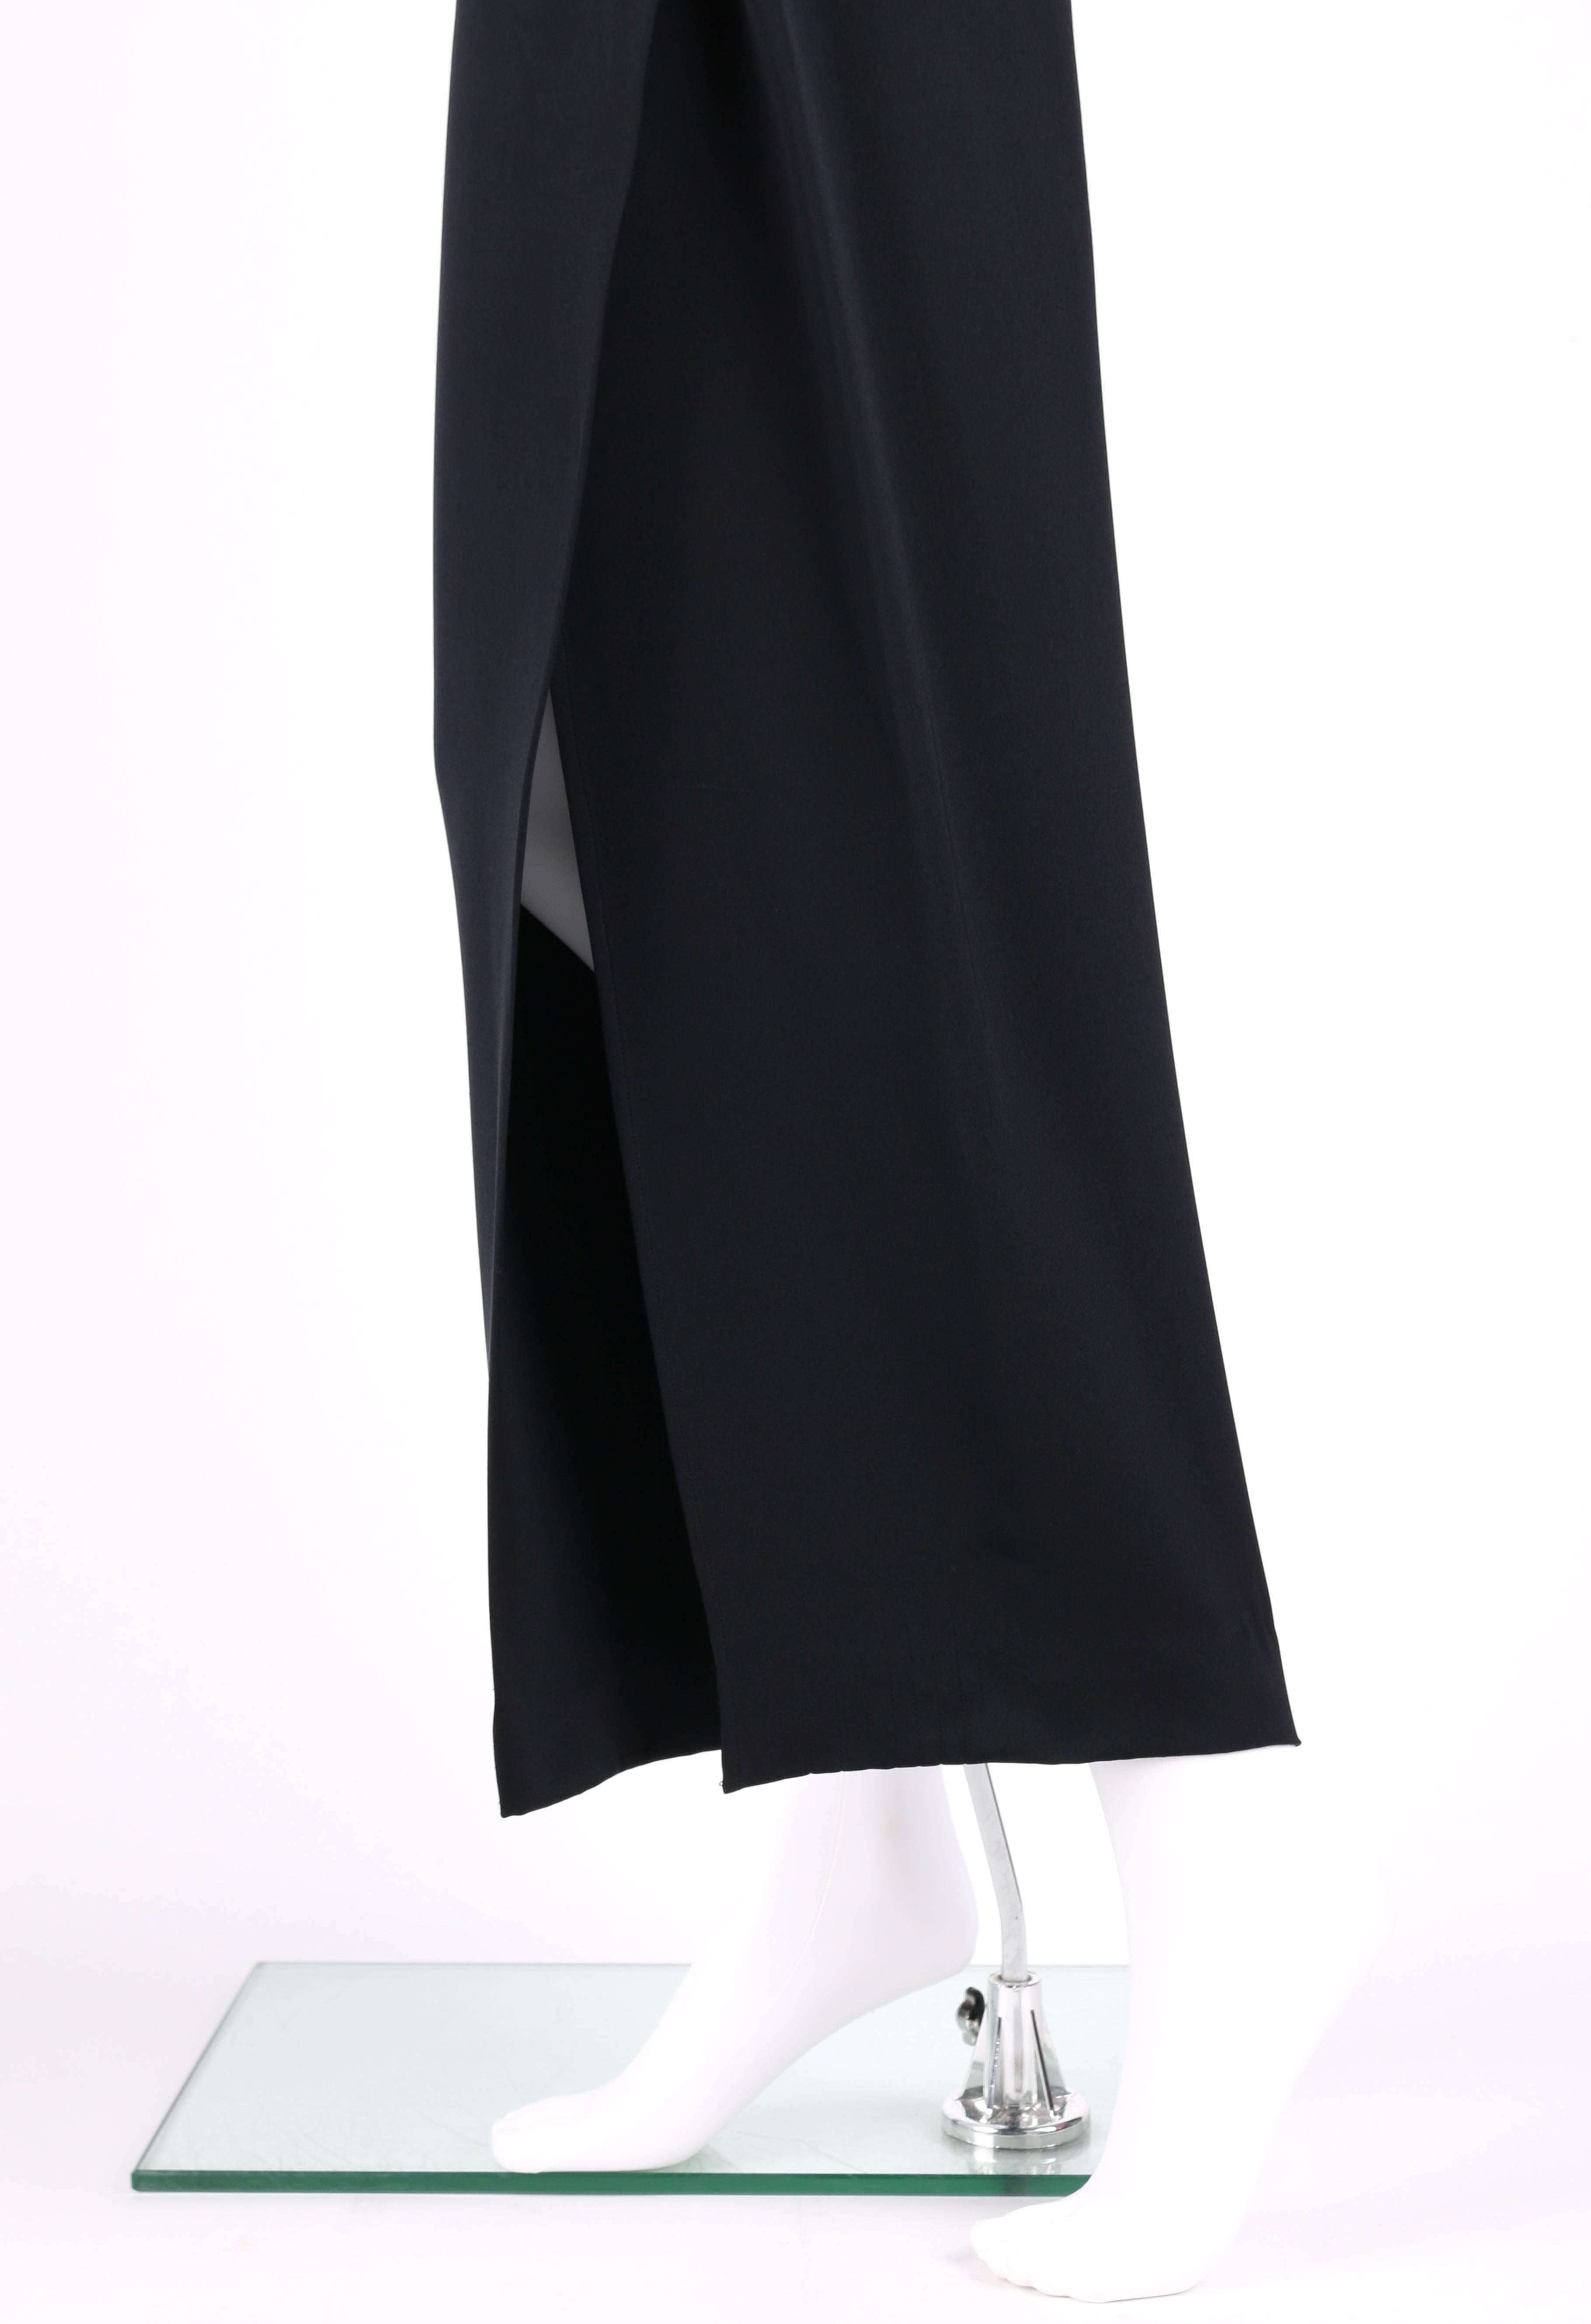 GIANNI VERSACE c.1990's Black Silk Drape Front Open Slit Leg Pants Size 38 In Good Condition For Sale In Thiensville, WI